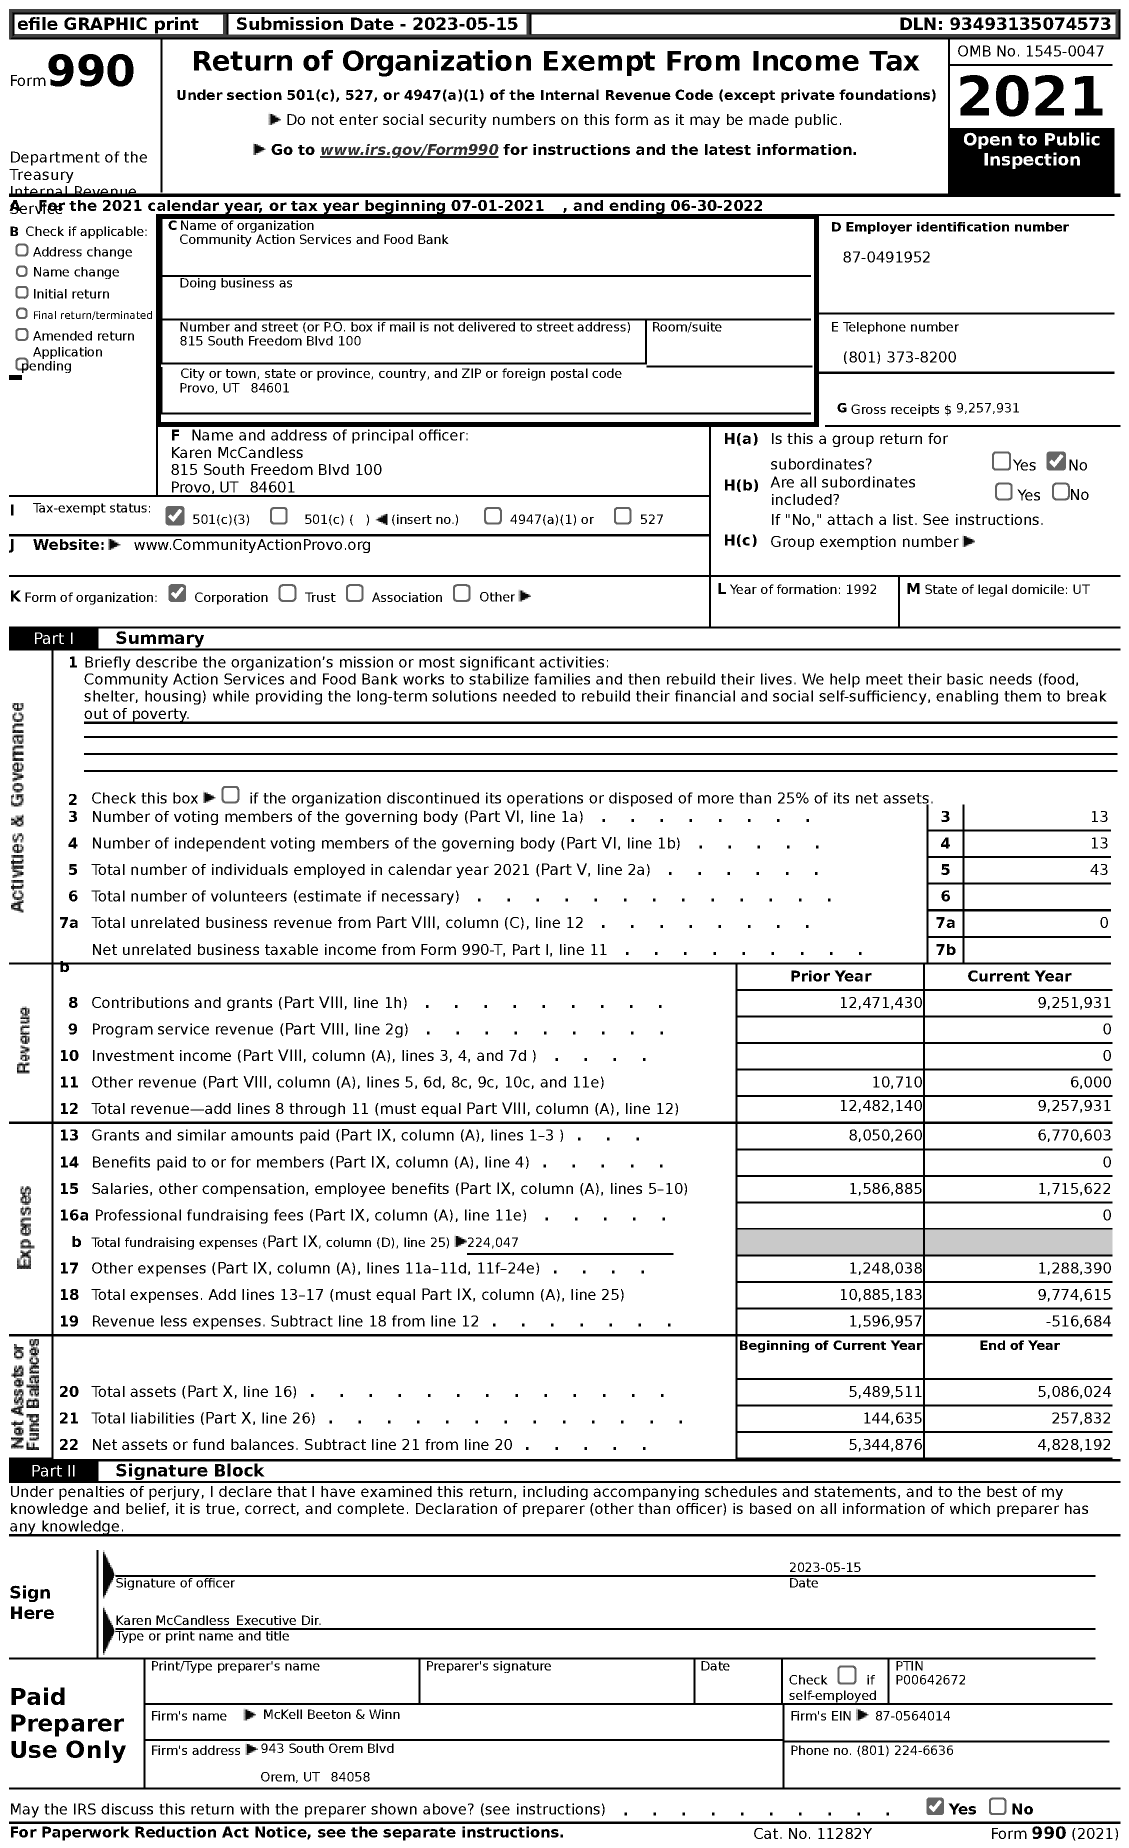 Image of first page of 2021 Form 990 for Community Action Services and Food Bank